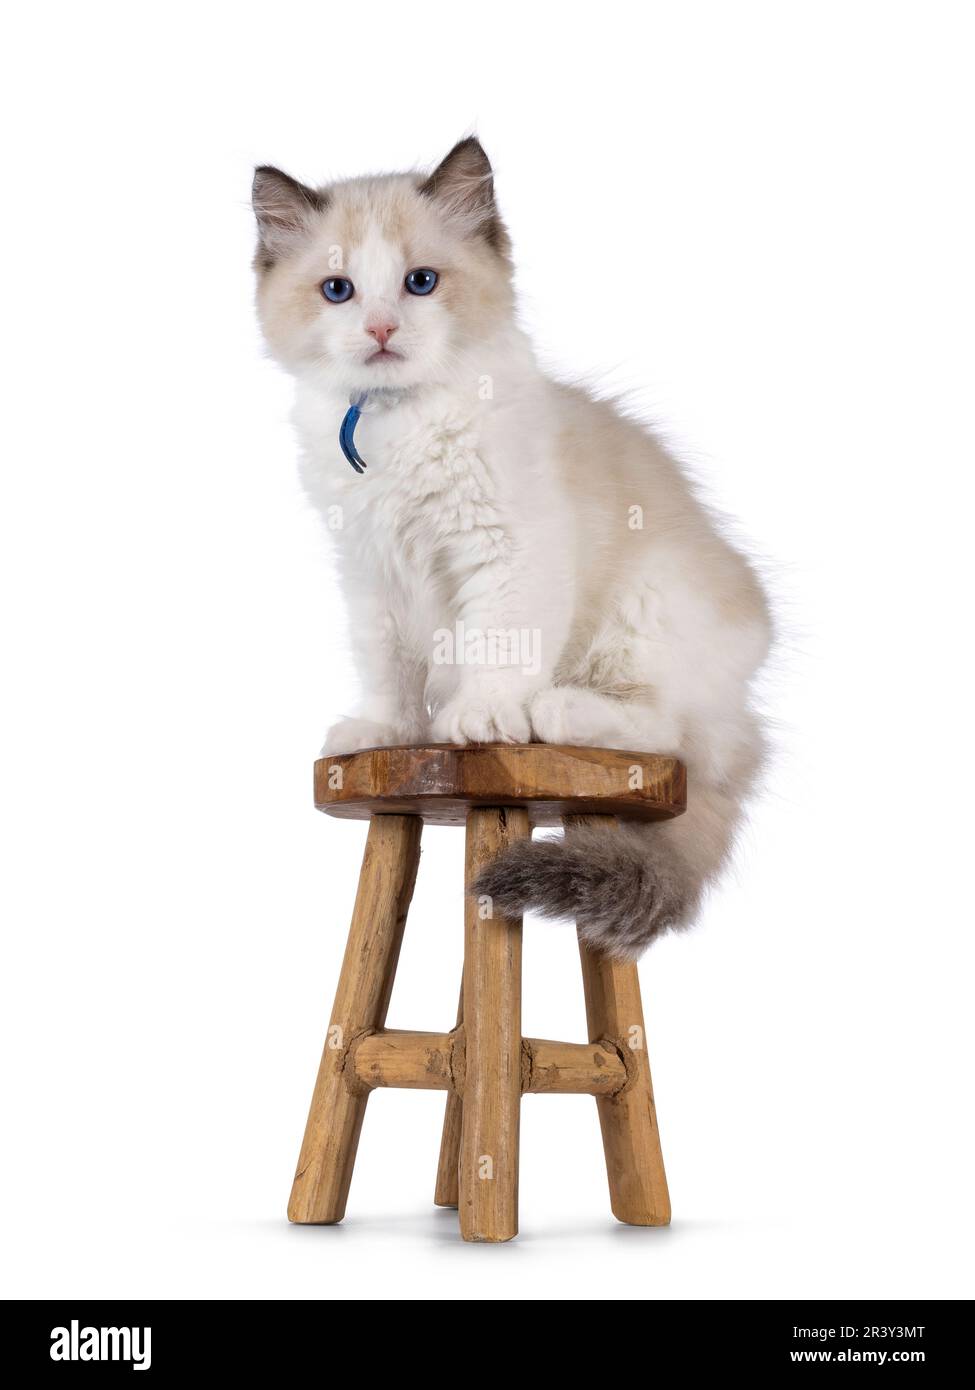 Cute bicolor Ragdoll cat kitten, sitting on little wooden stool. Looking towards camera with blue eyes. Isolated on a white background. Stock Photo